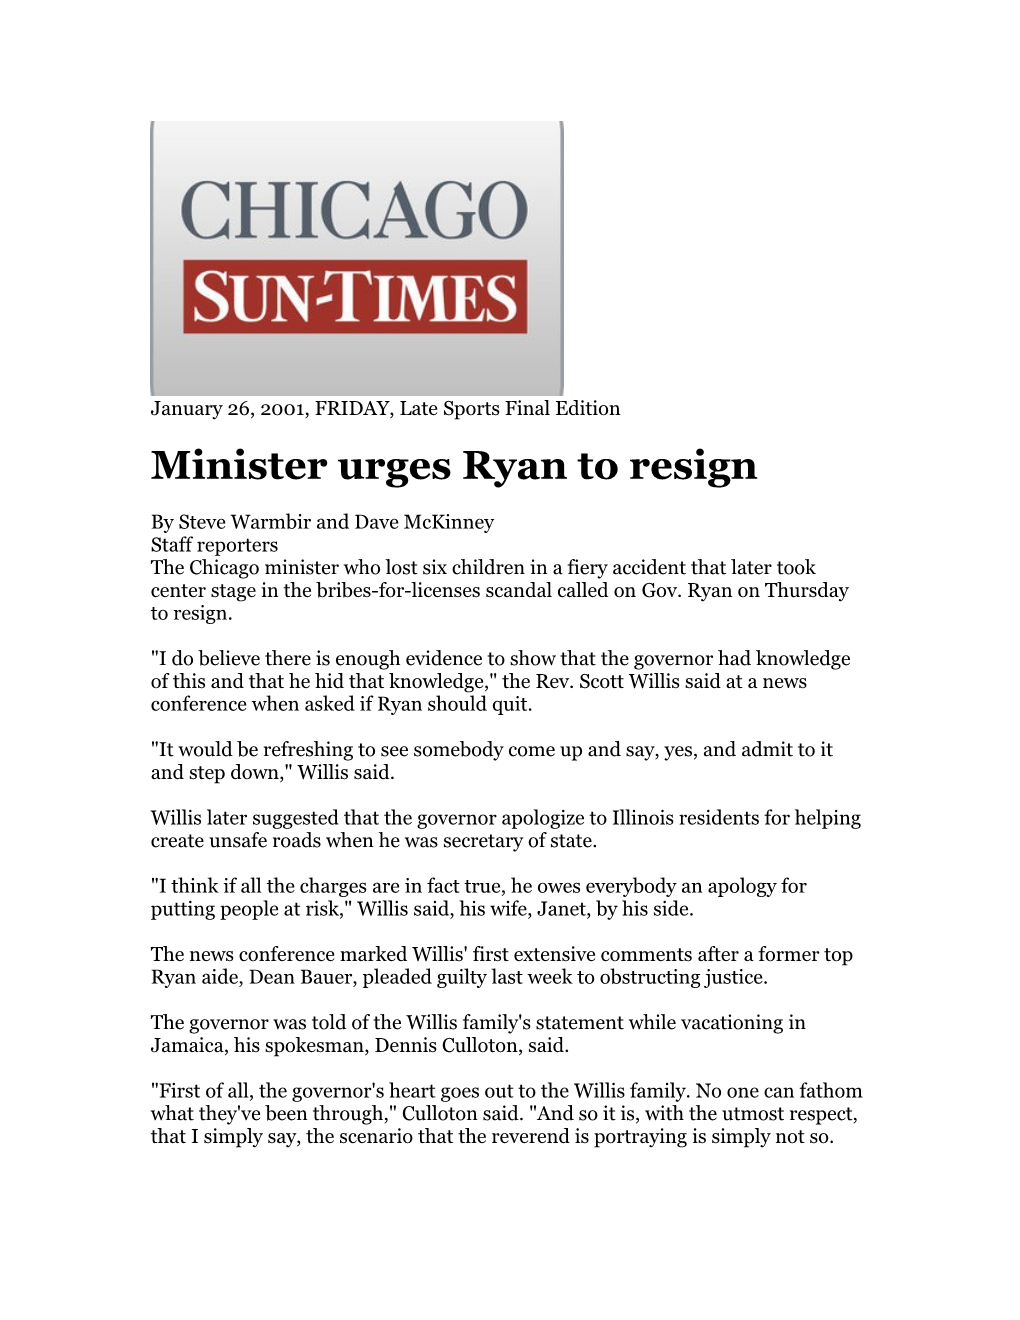 Minister Urges Ryan to Resign